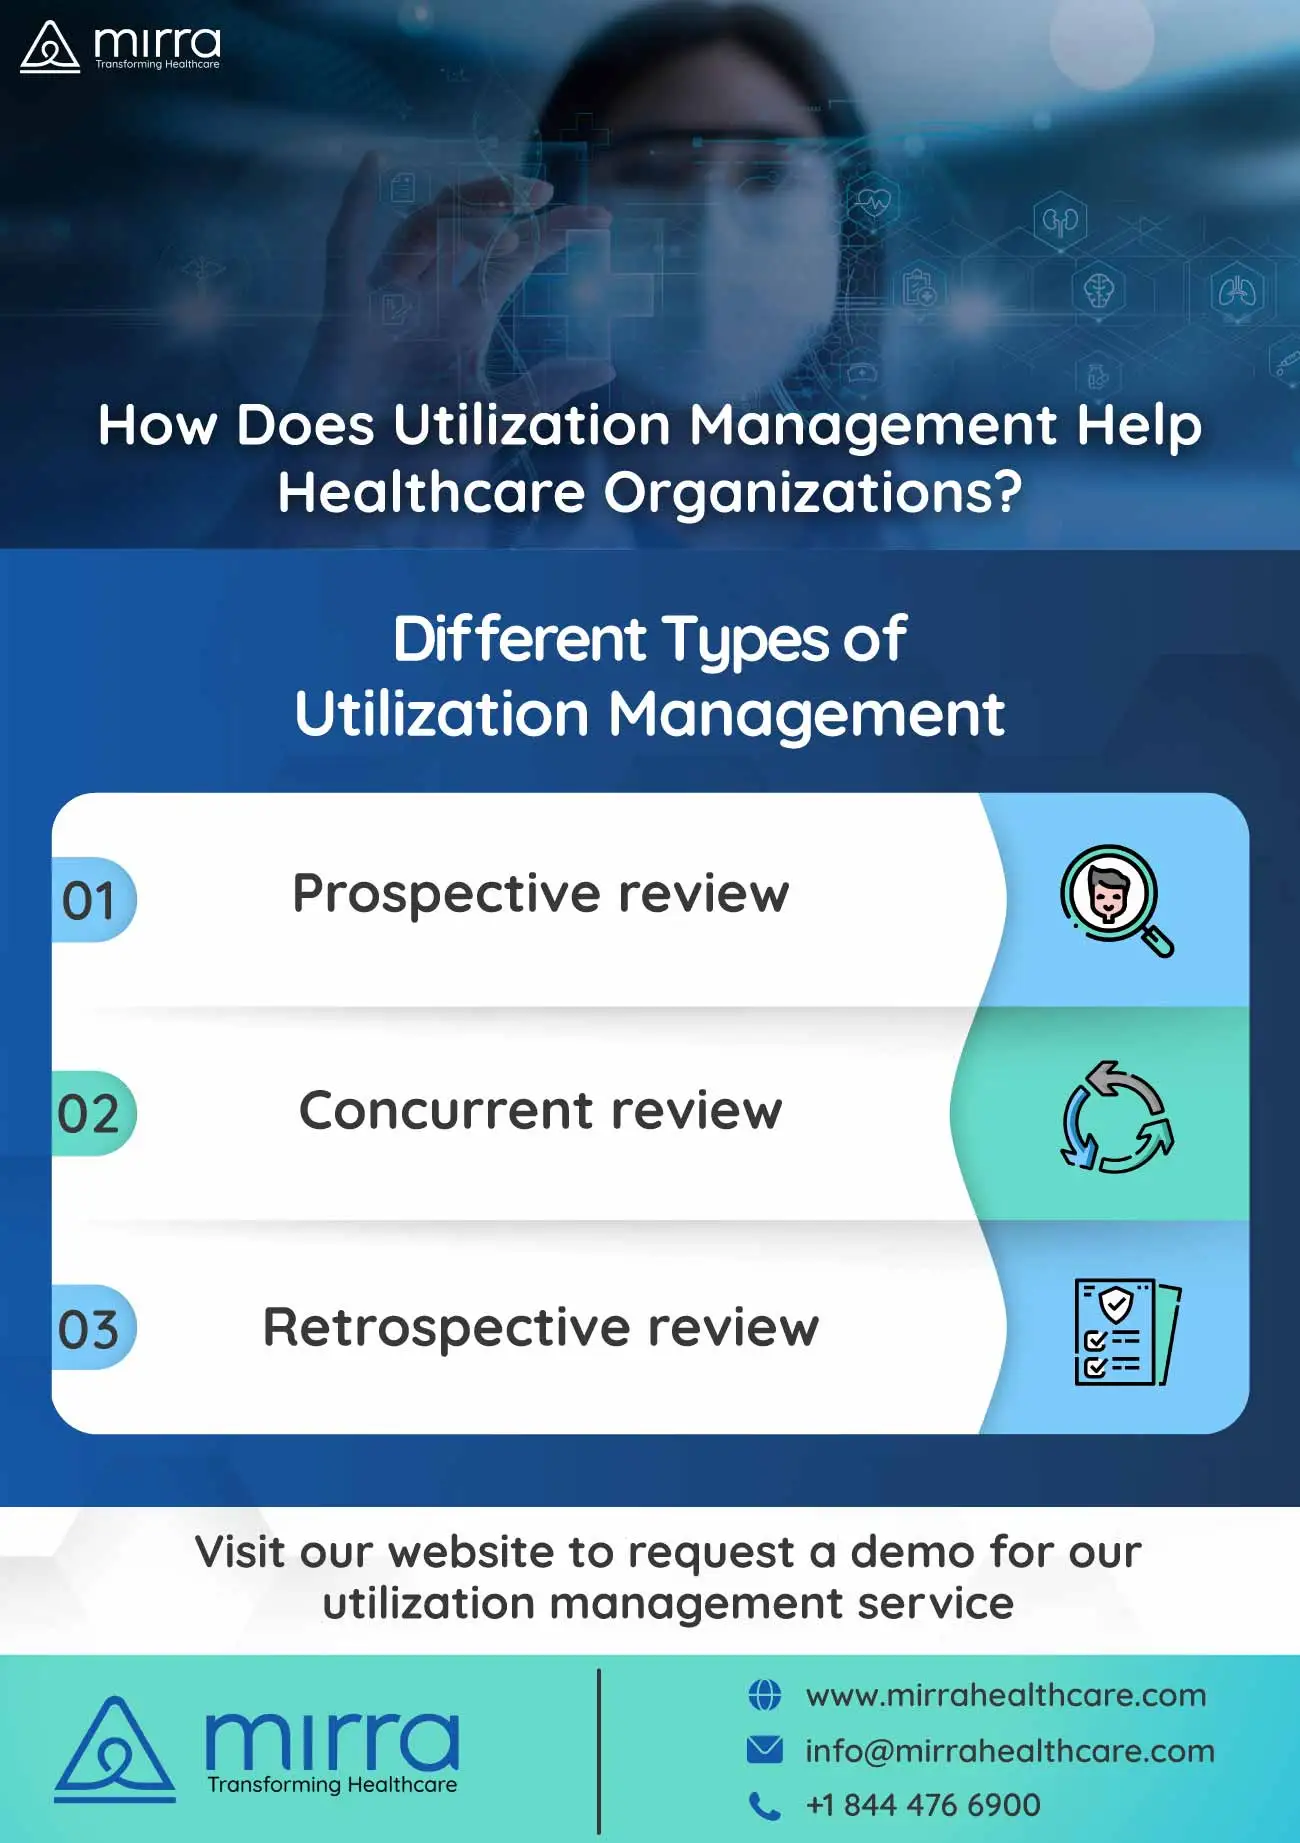 How Can Mirra Healthcare’s Utilization Management Services Help Your Medical Practice